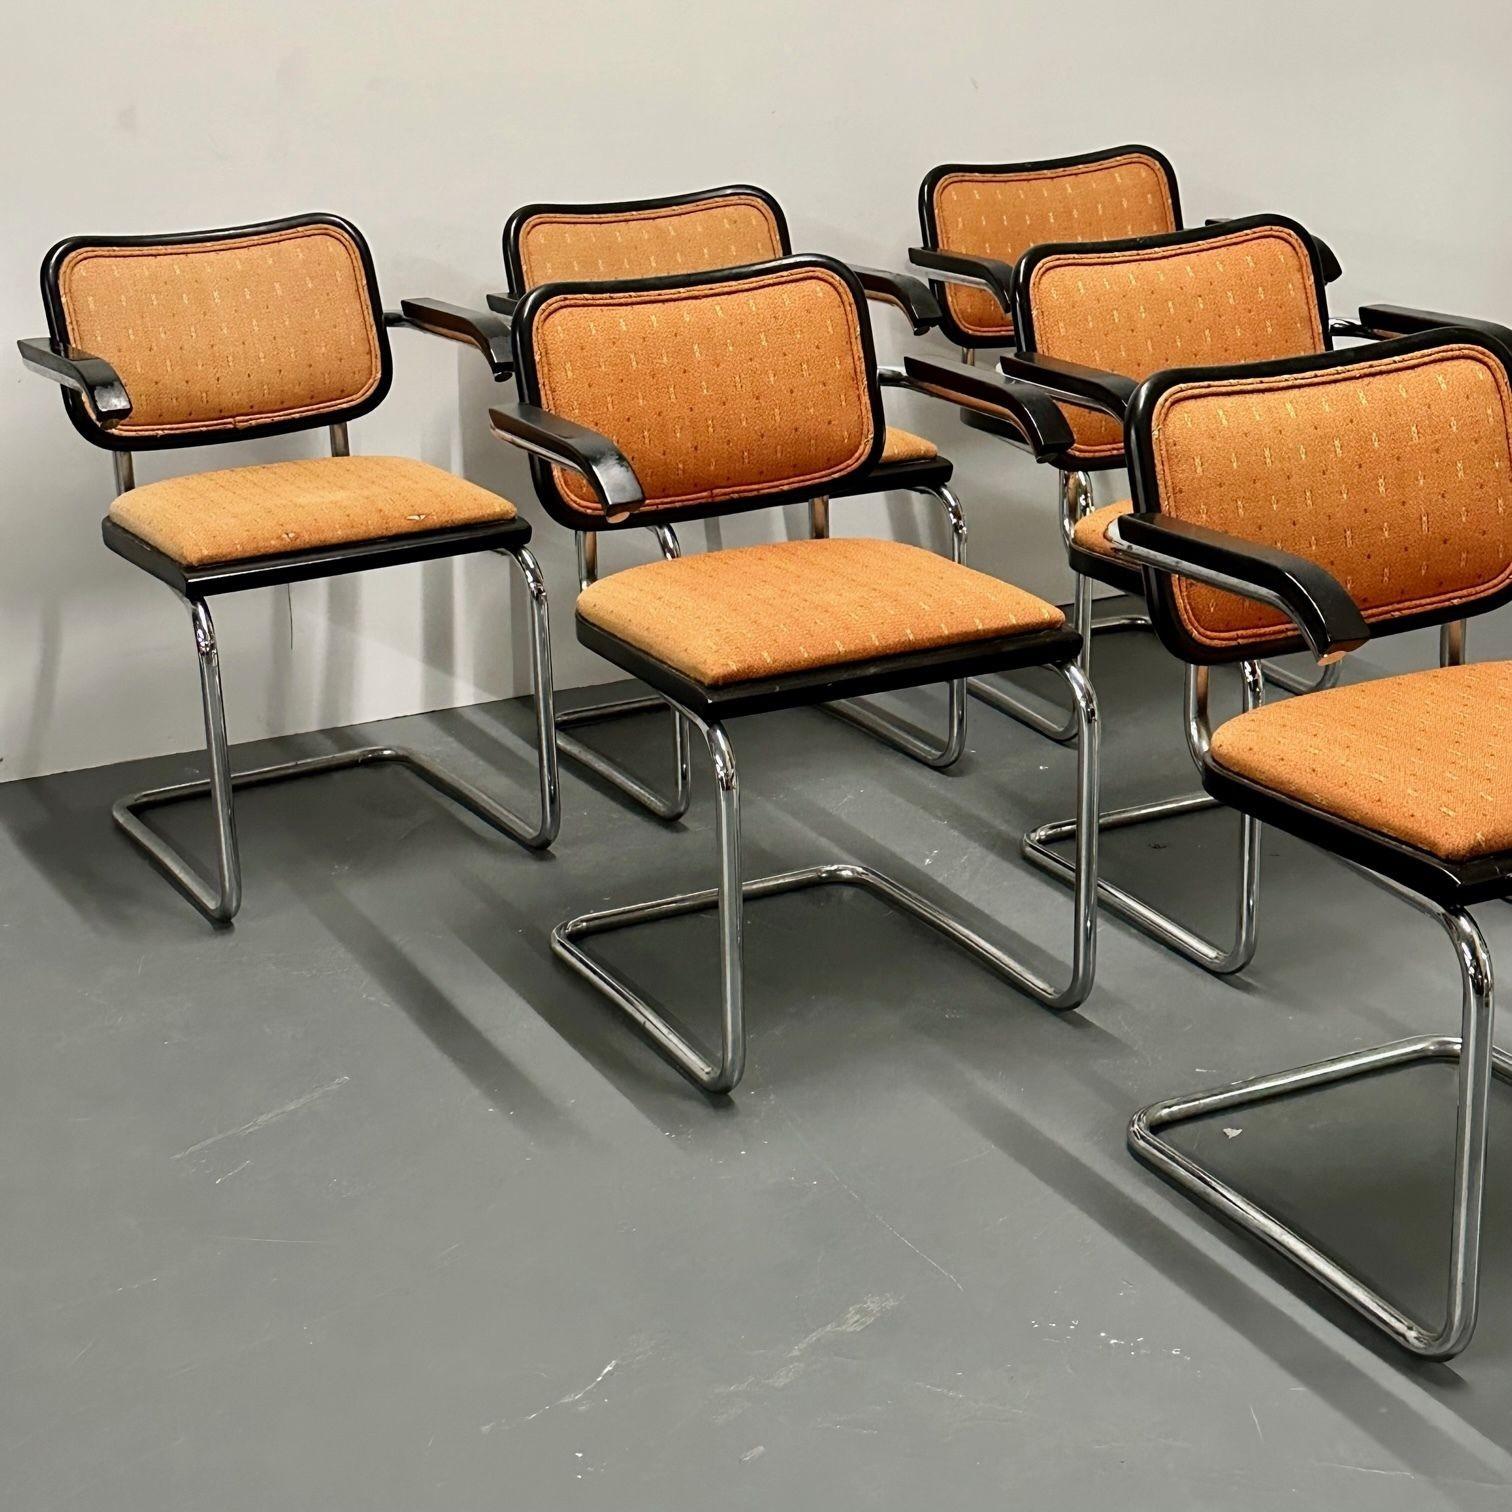 Mid-20th Century Six Mid-Century Modern Marcel Breuer for Knoll Cesca Chairs, Lacquer, 1960s